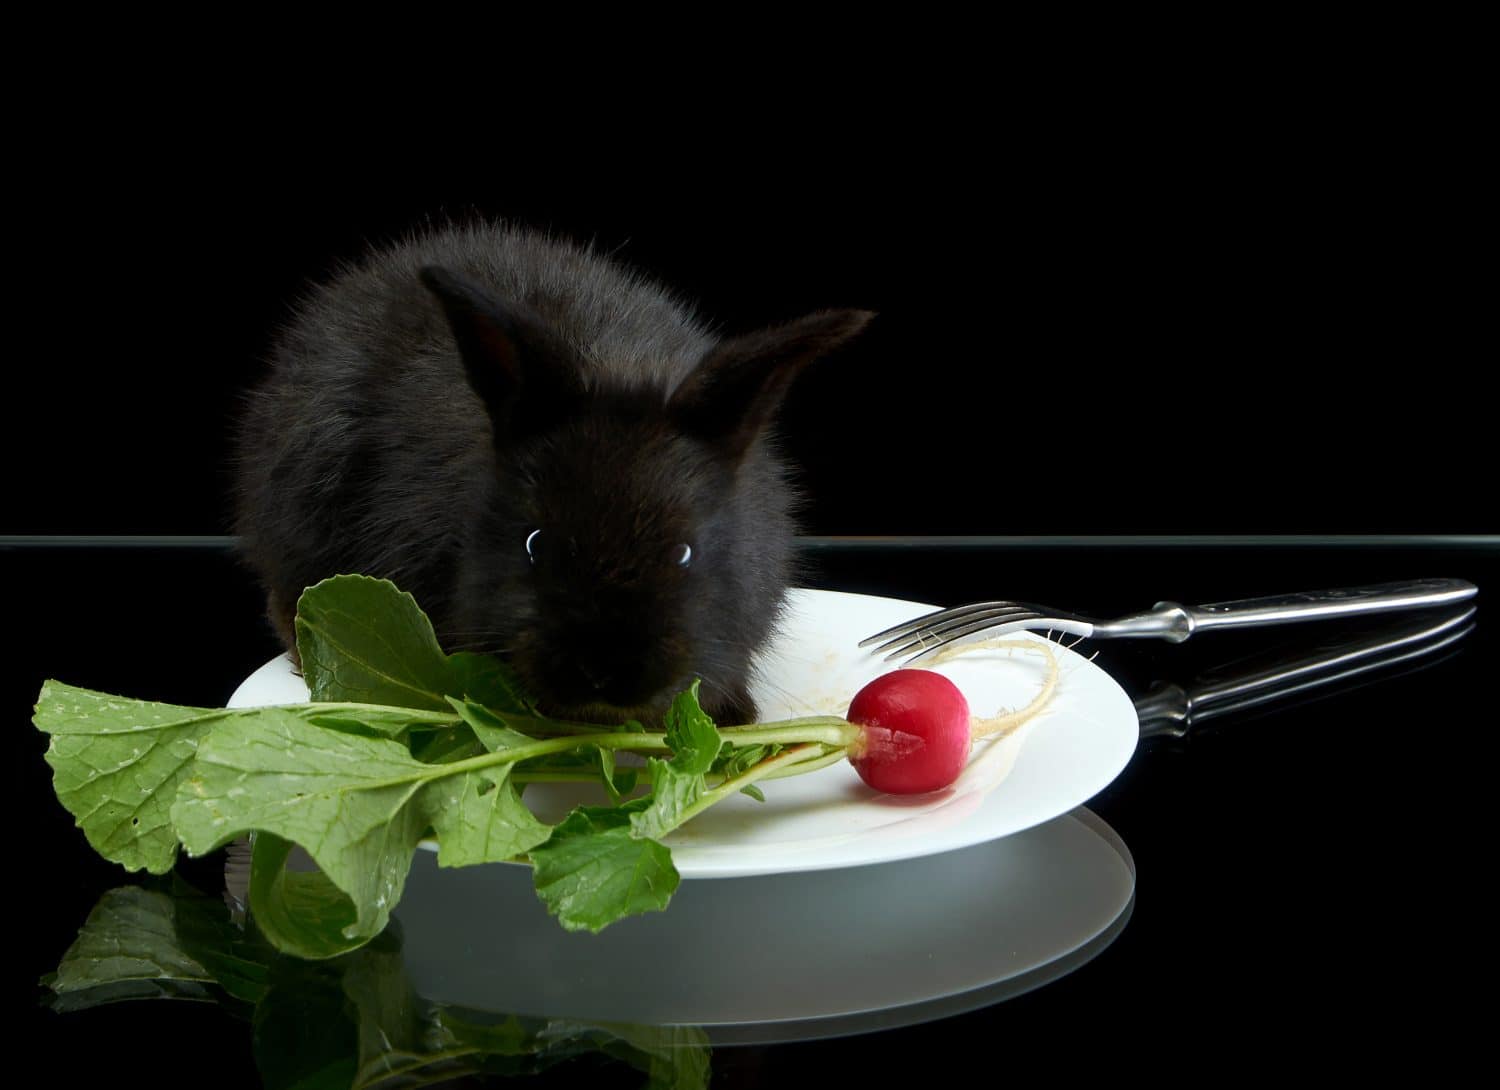 Young black rabbit eating radish in white plate on black background